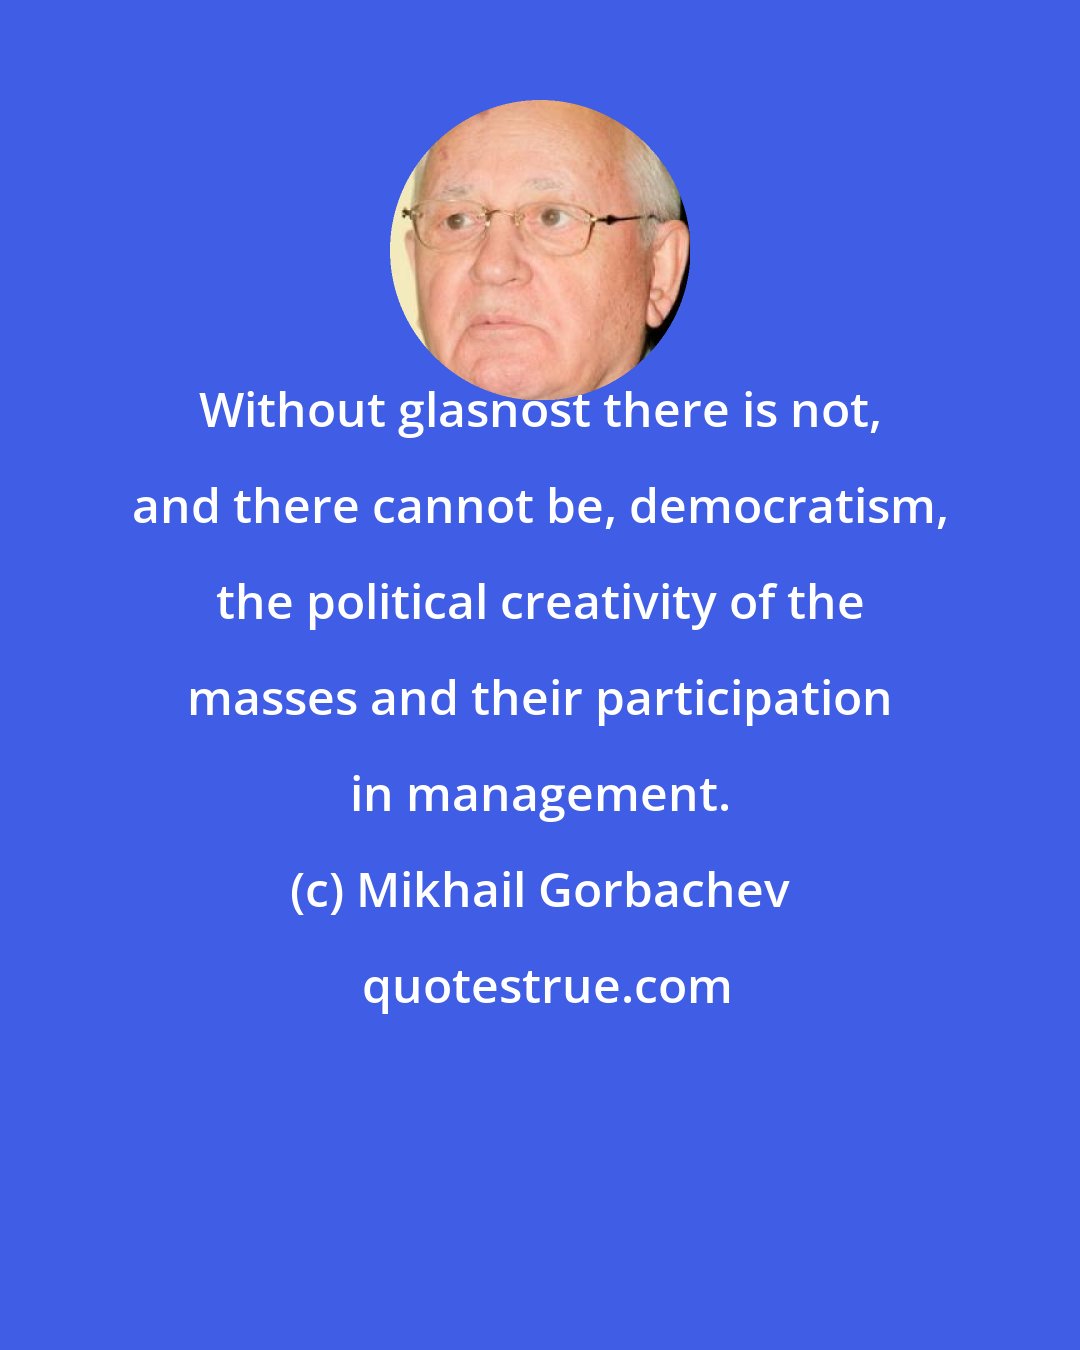 Mikhail Gorbachev: Without glasnost there is not, and there cannot be, democratism, the political creativity of the masses and their participation in management.